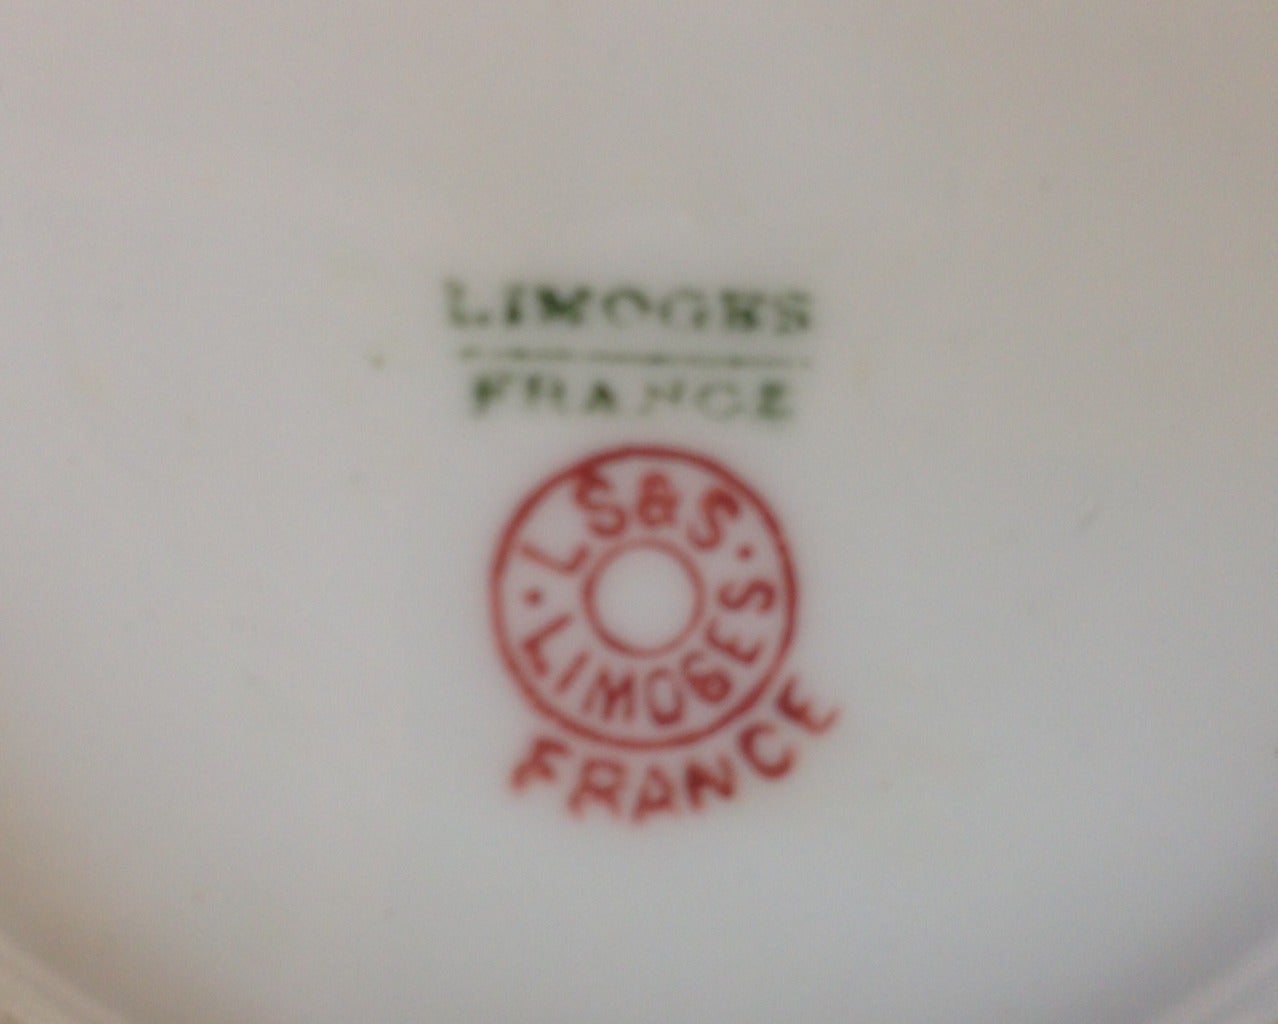 Circa 1890
Signed lower right
Lewis Straus and Sons importers
Stamped Limoges, France